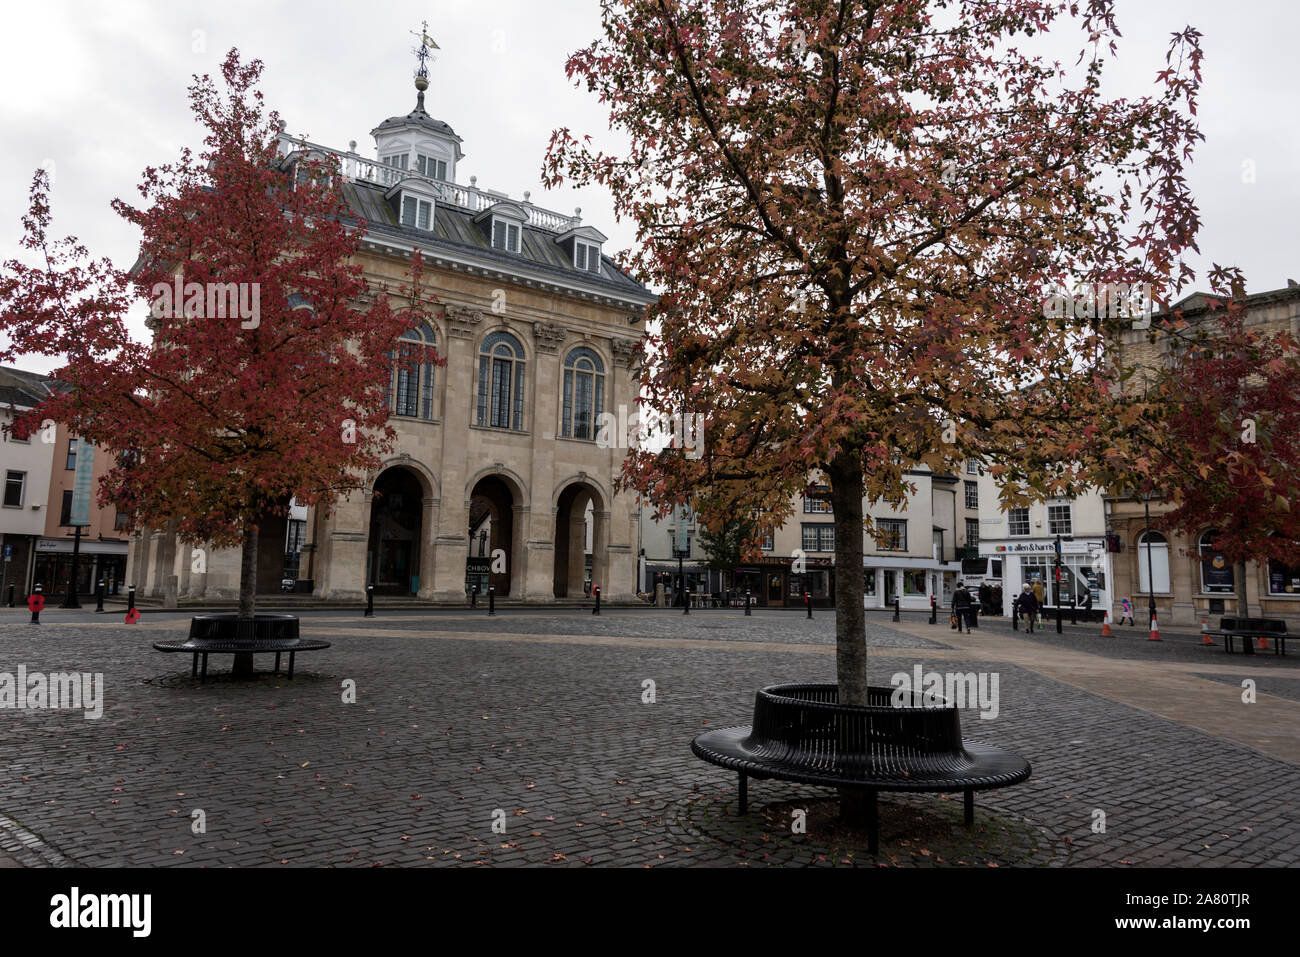 Young trees with Autumn leaves in Market Place in front of the Abingdon County Hall Museum in Abingdon-on-Thames, a historic market town in South Oxfo Stock Photo